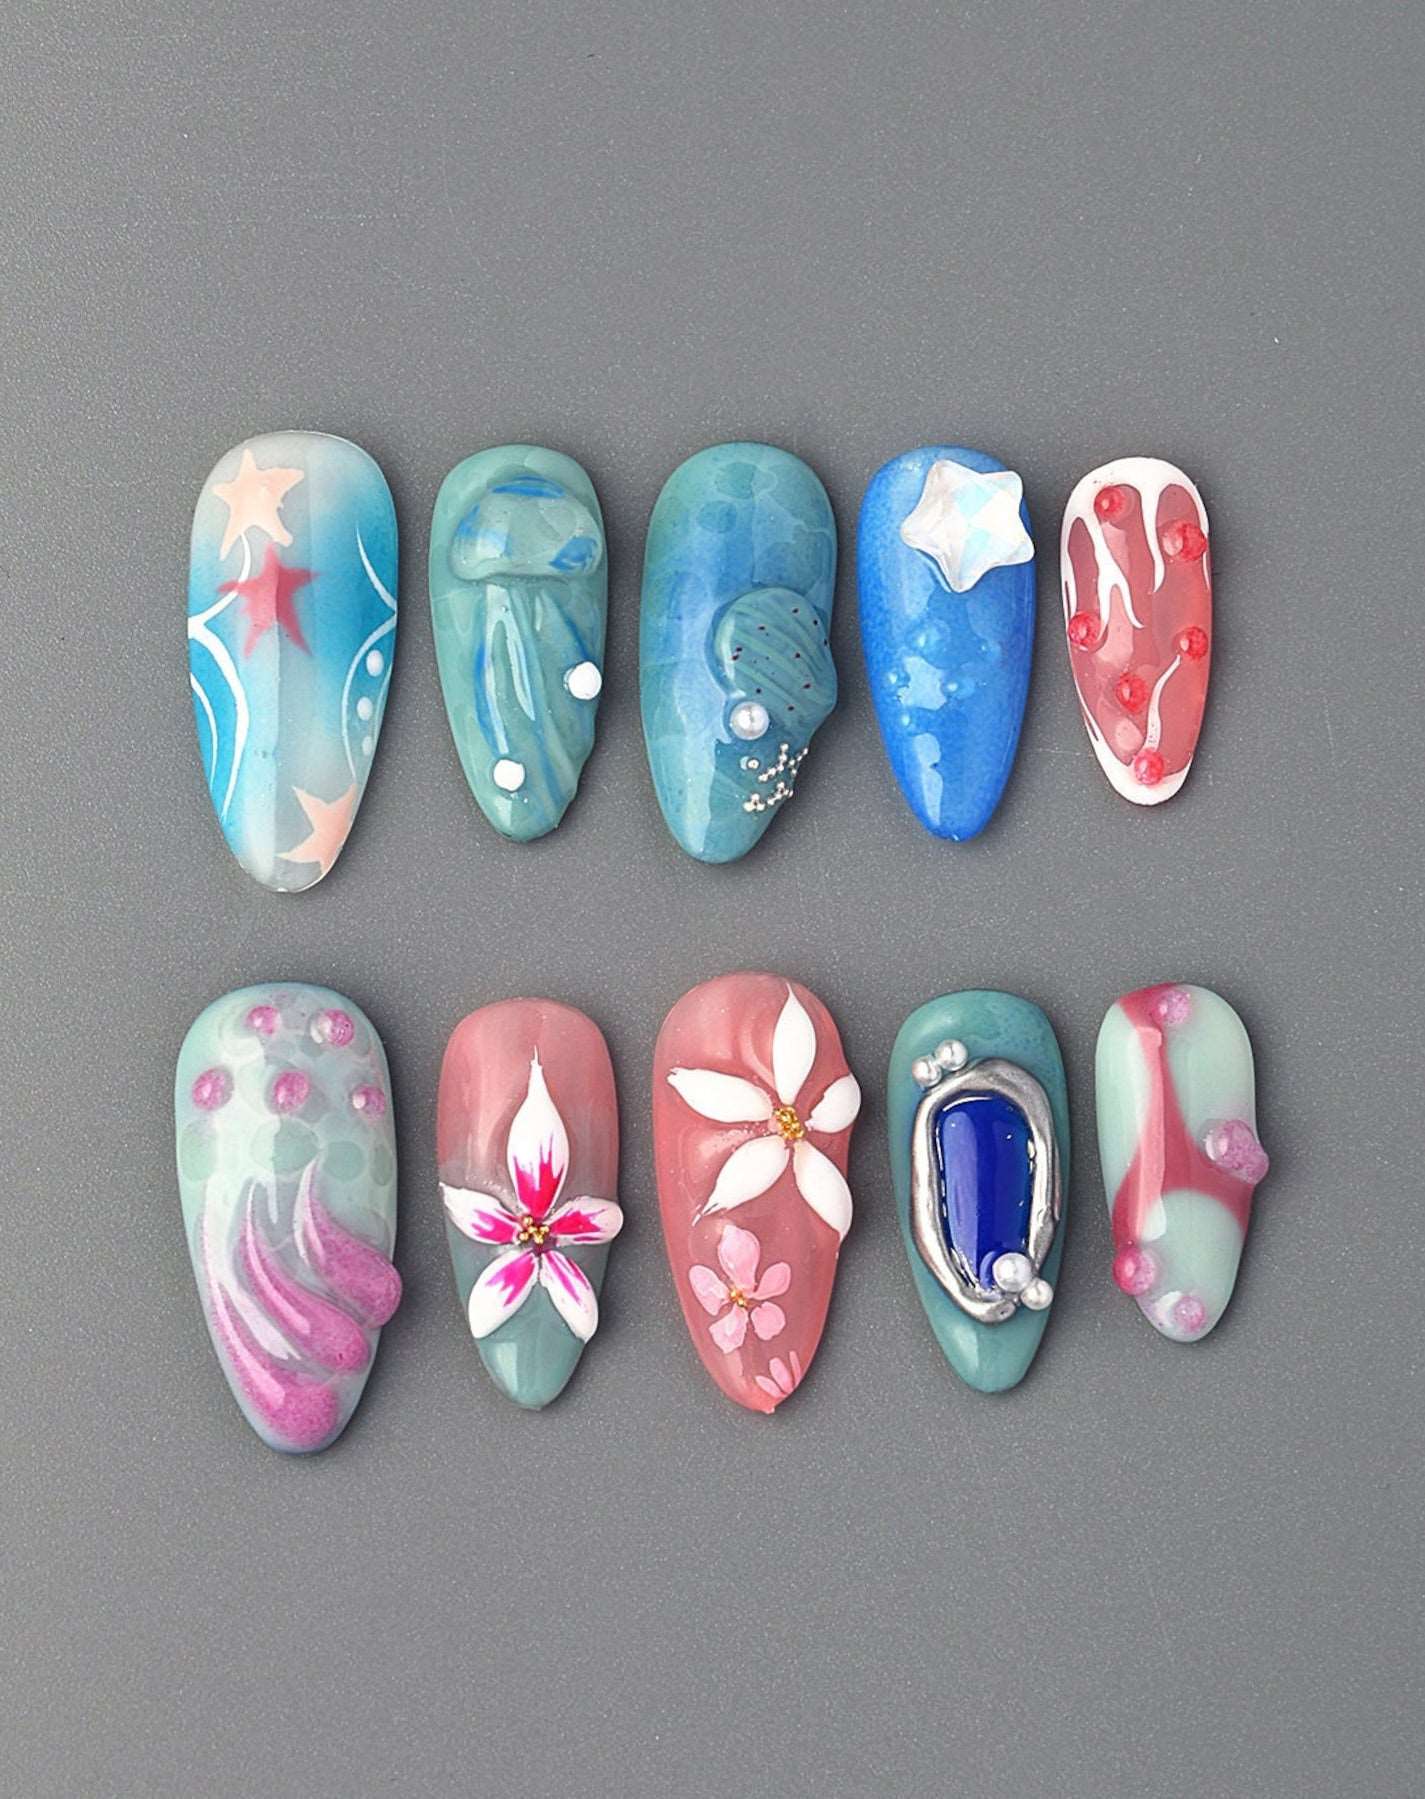 Colorful Free Style Handmade Summer Press On Nails - Flower Beach Design